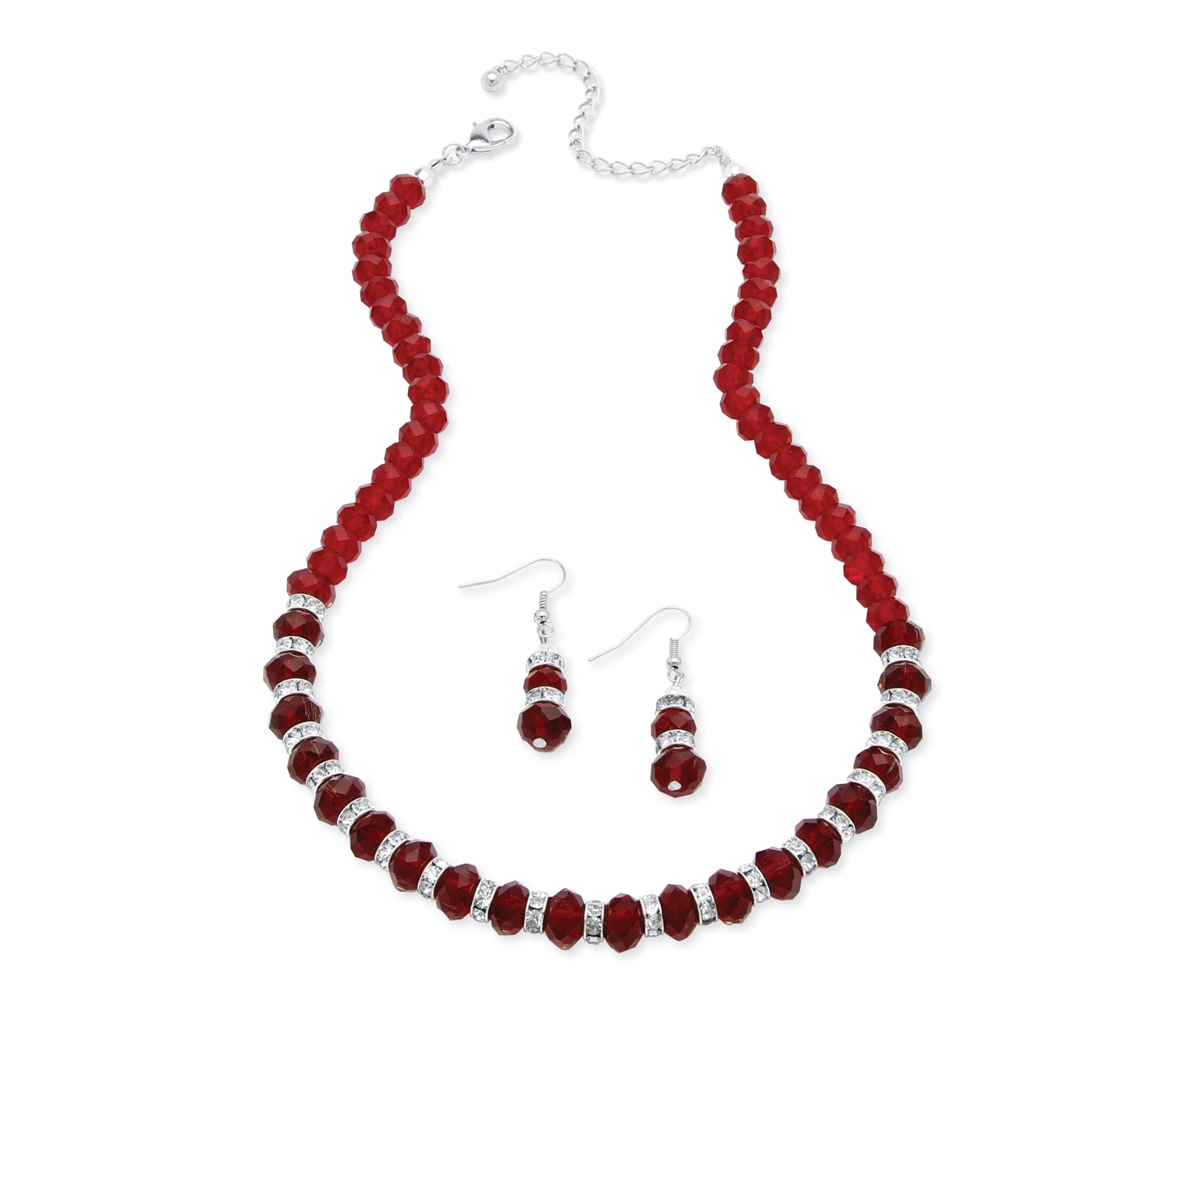 PalmBeach Jewelry Birthstone Necklace and Earrings Set in Silvertone